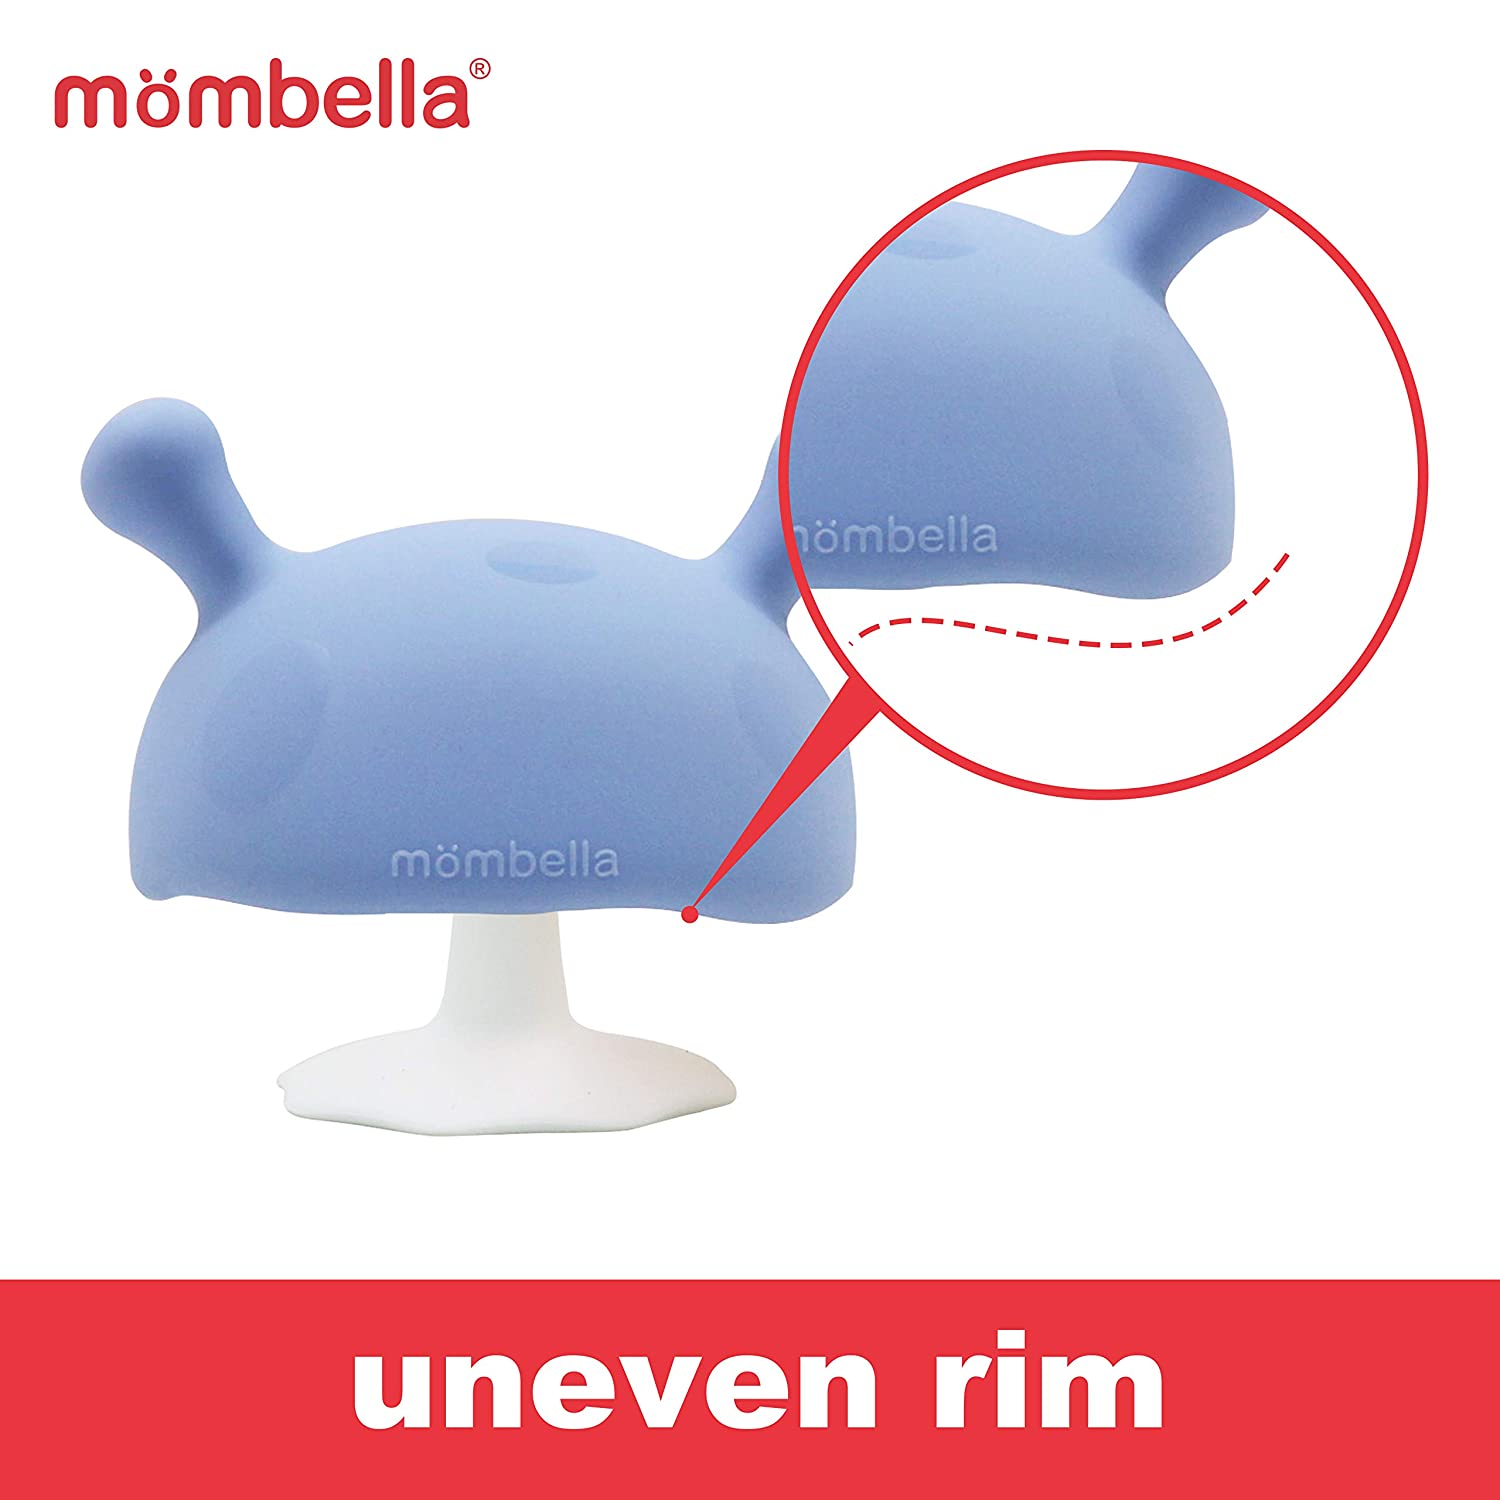 Mombella Mimi Mushroom Pacifier Shape Skin-Like Infant Soothing Teether Toy for 0-6 Months Sucking Needs Babies, Help with Breast Feeding weaning and Prevent Digit Sucking.Light Blue